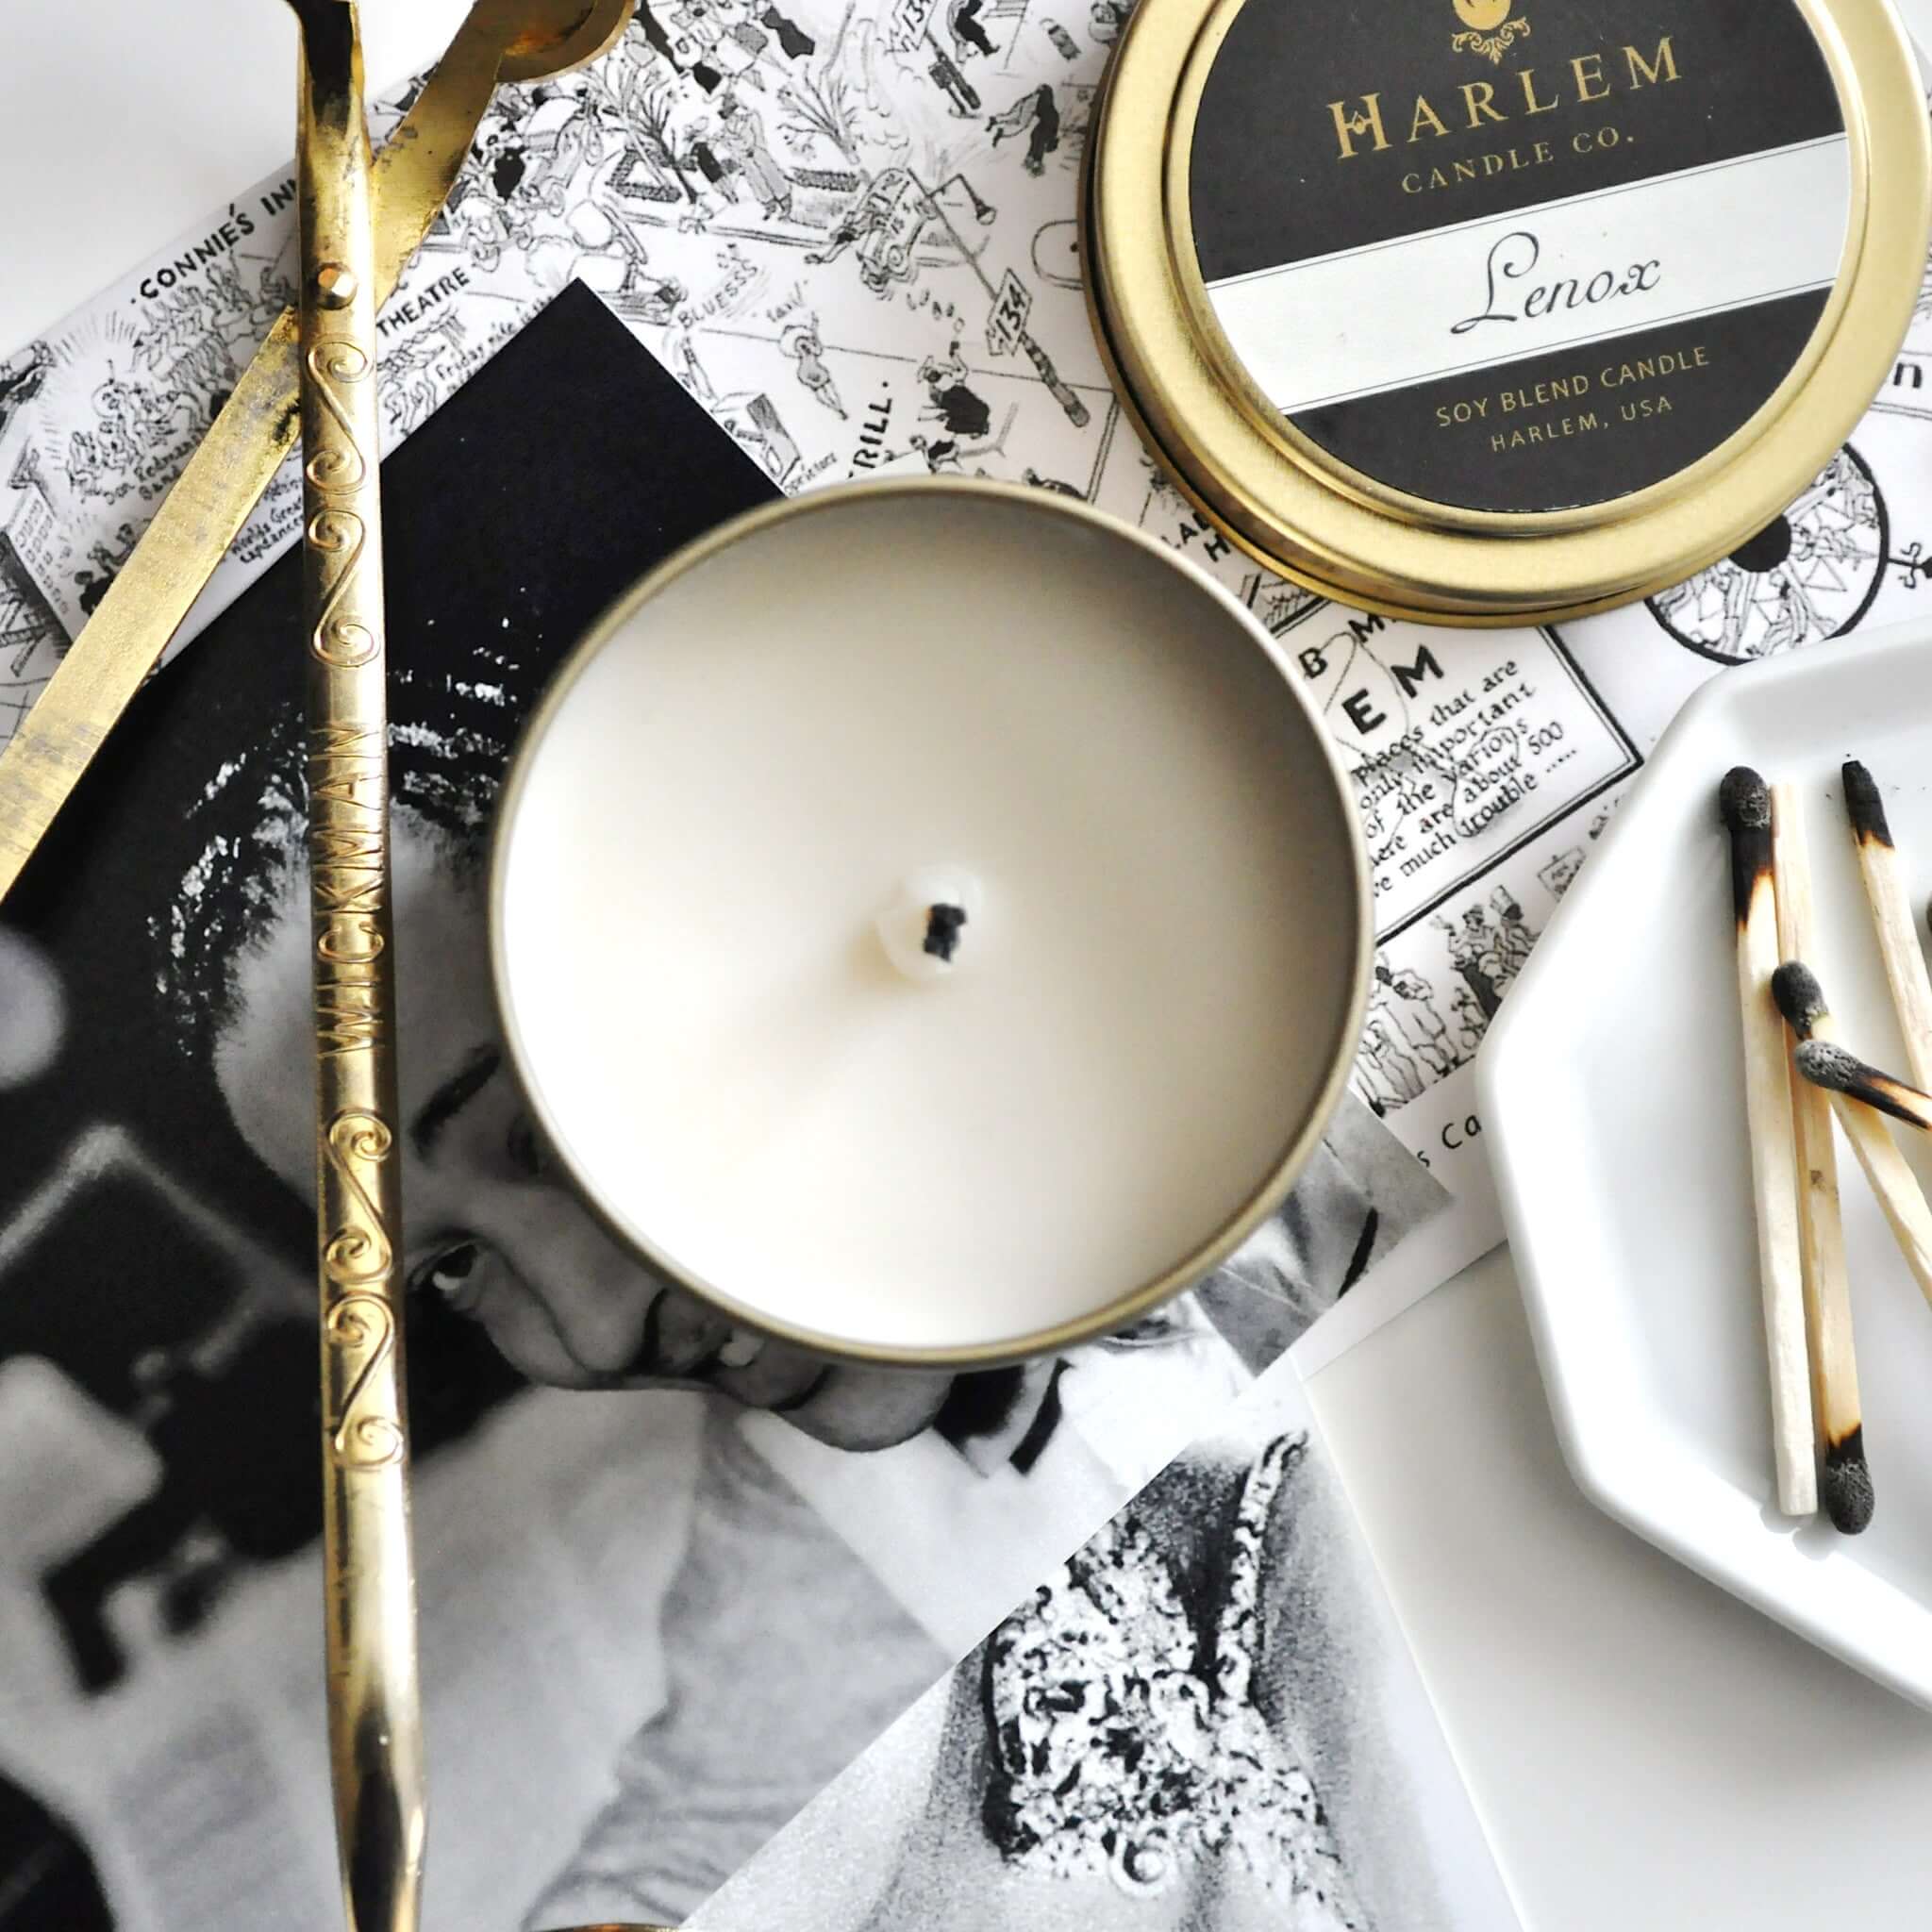 Our stunning Lenox travel candle in a  gold metal tin sitting atop our black and white harlem map..